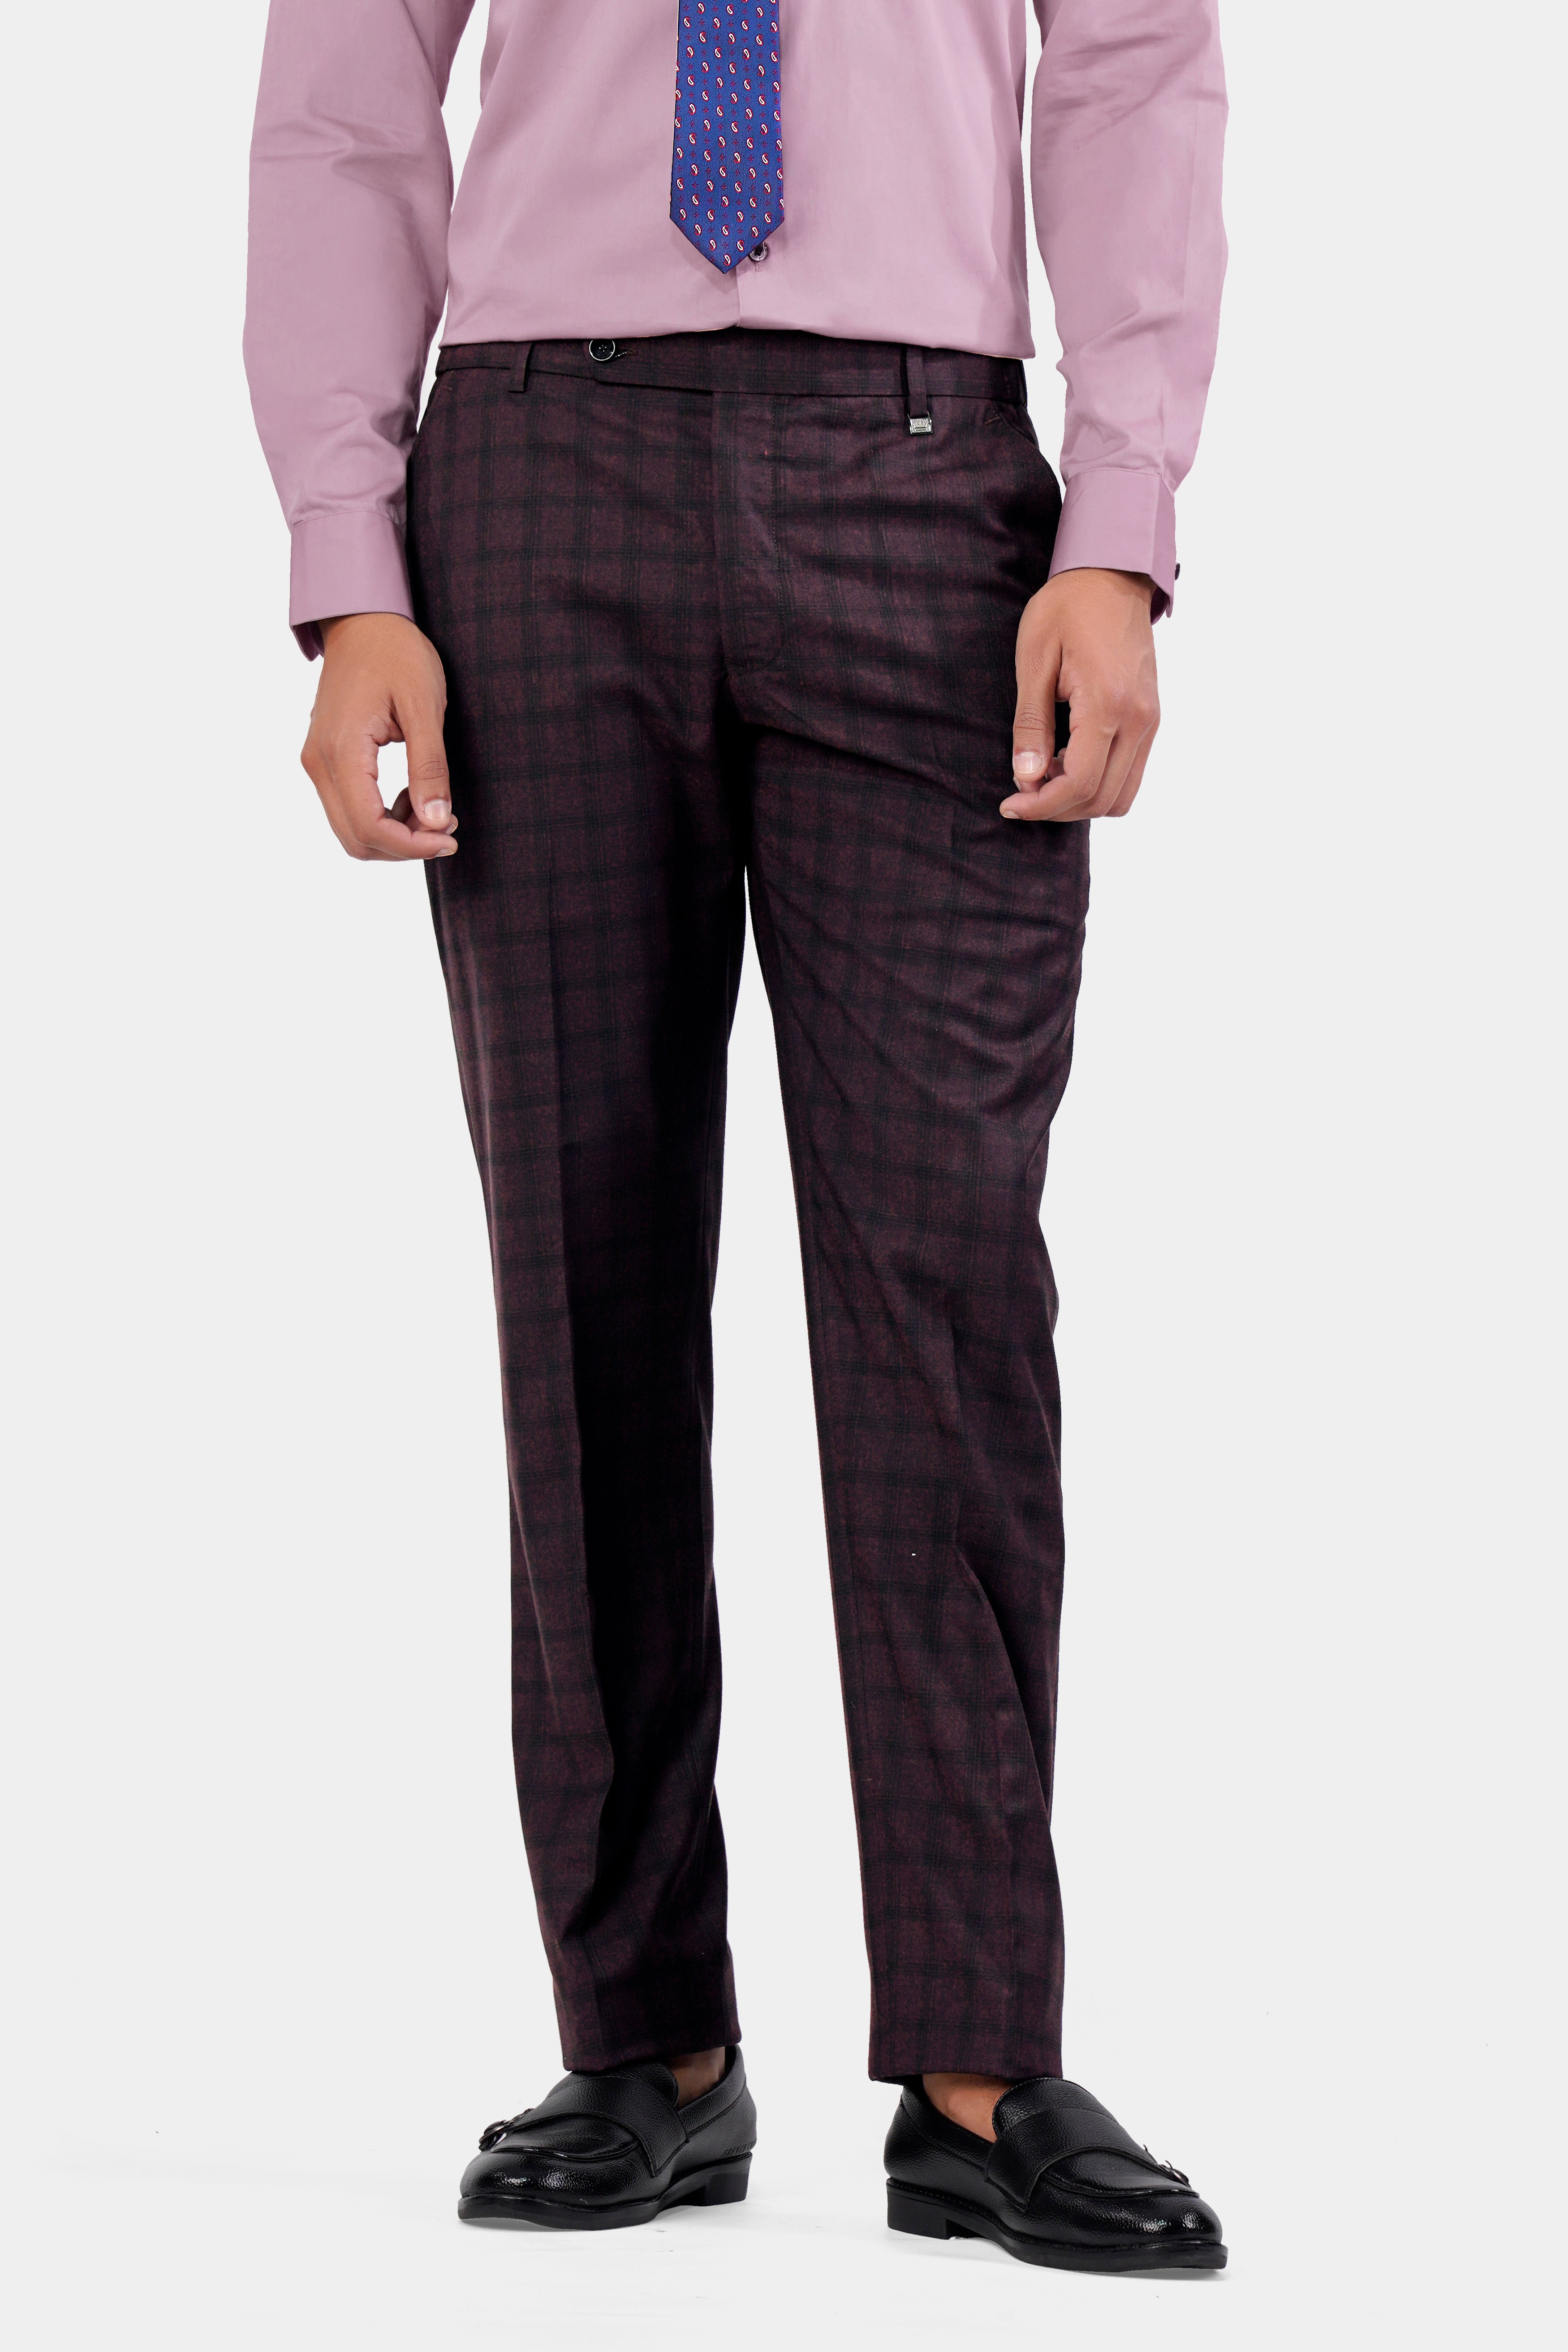 Cinder Purple Checkered Double Breasted Wool Rich Suit ST2916-DB-36,ST2916-DB-38,ST2916-DB-40,ST2916-DB-42,ST2916-DB-44,ST2916-DB-46,ST2916-DB-48,ST2916-DB-50,ST2916-DB-52,ST2916-DB-54,ST2916-DB-56,ST2916-DB-58,ST2916-DB-60